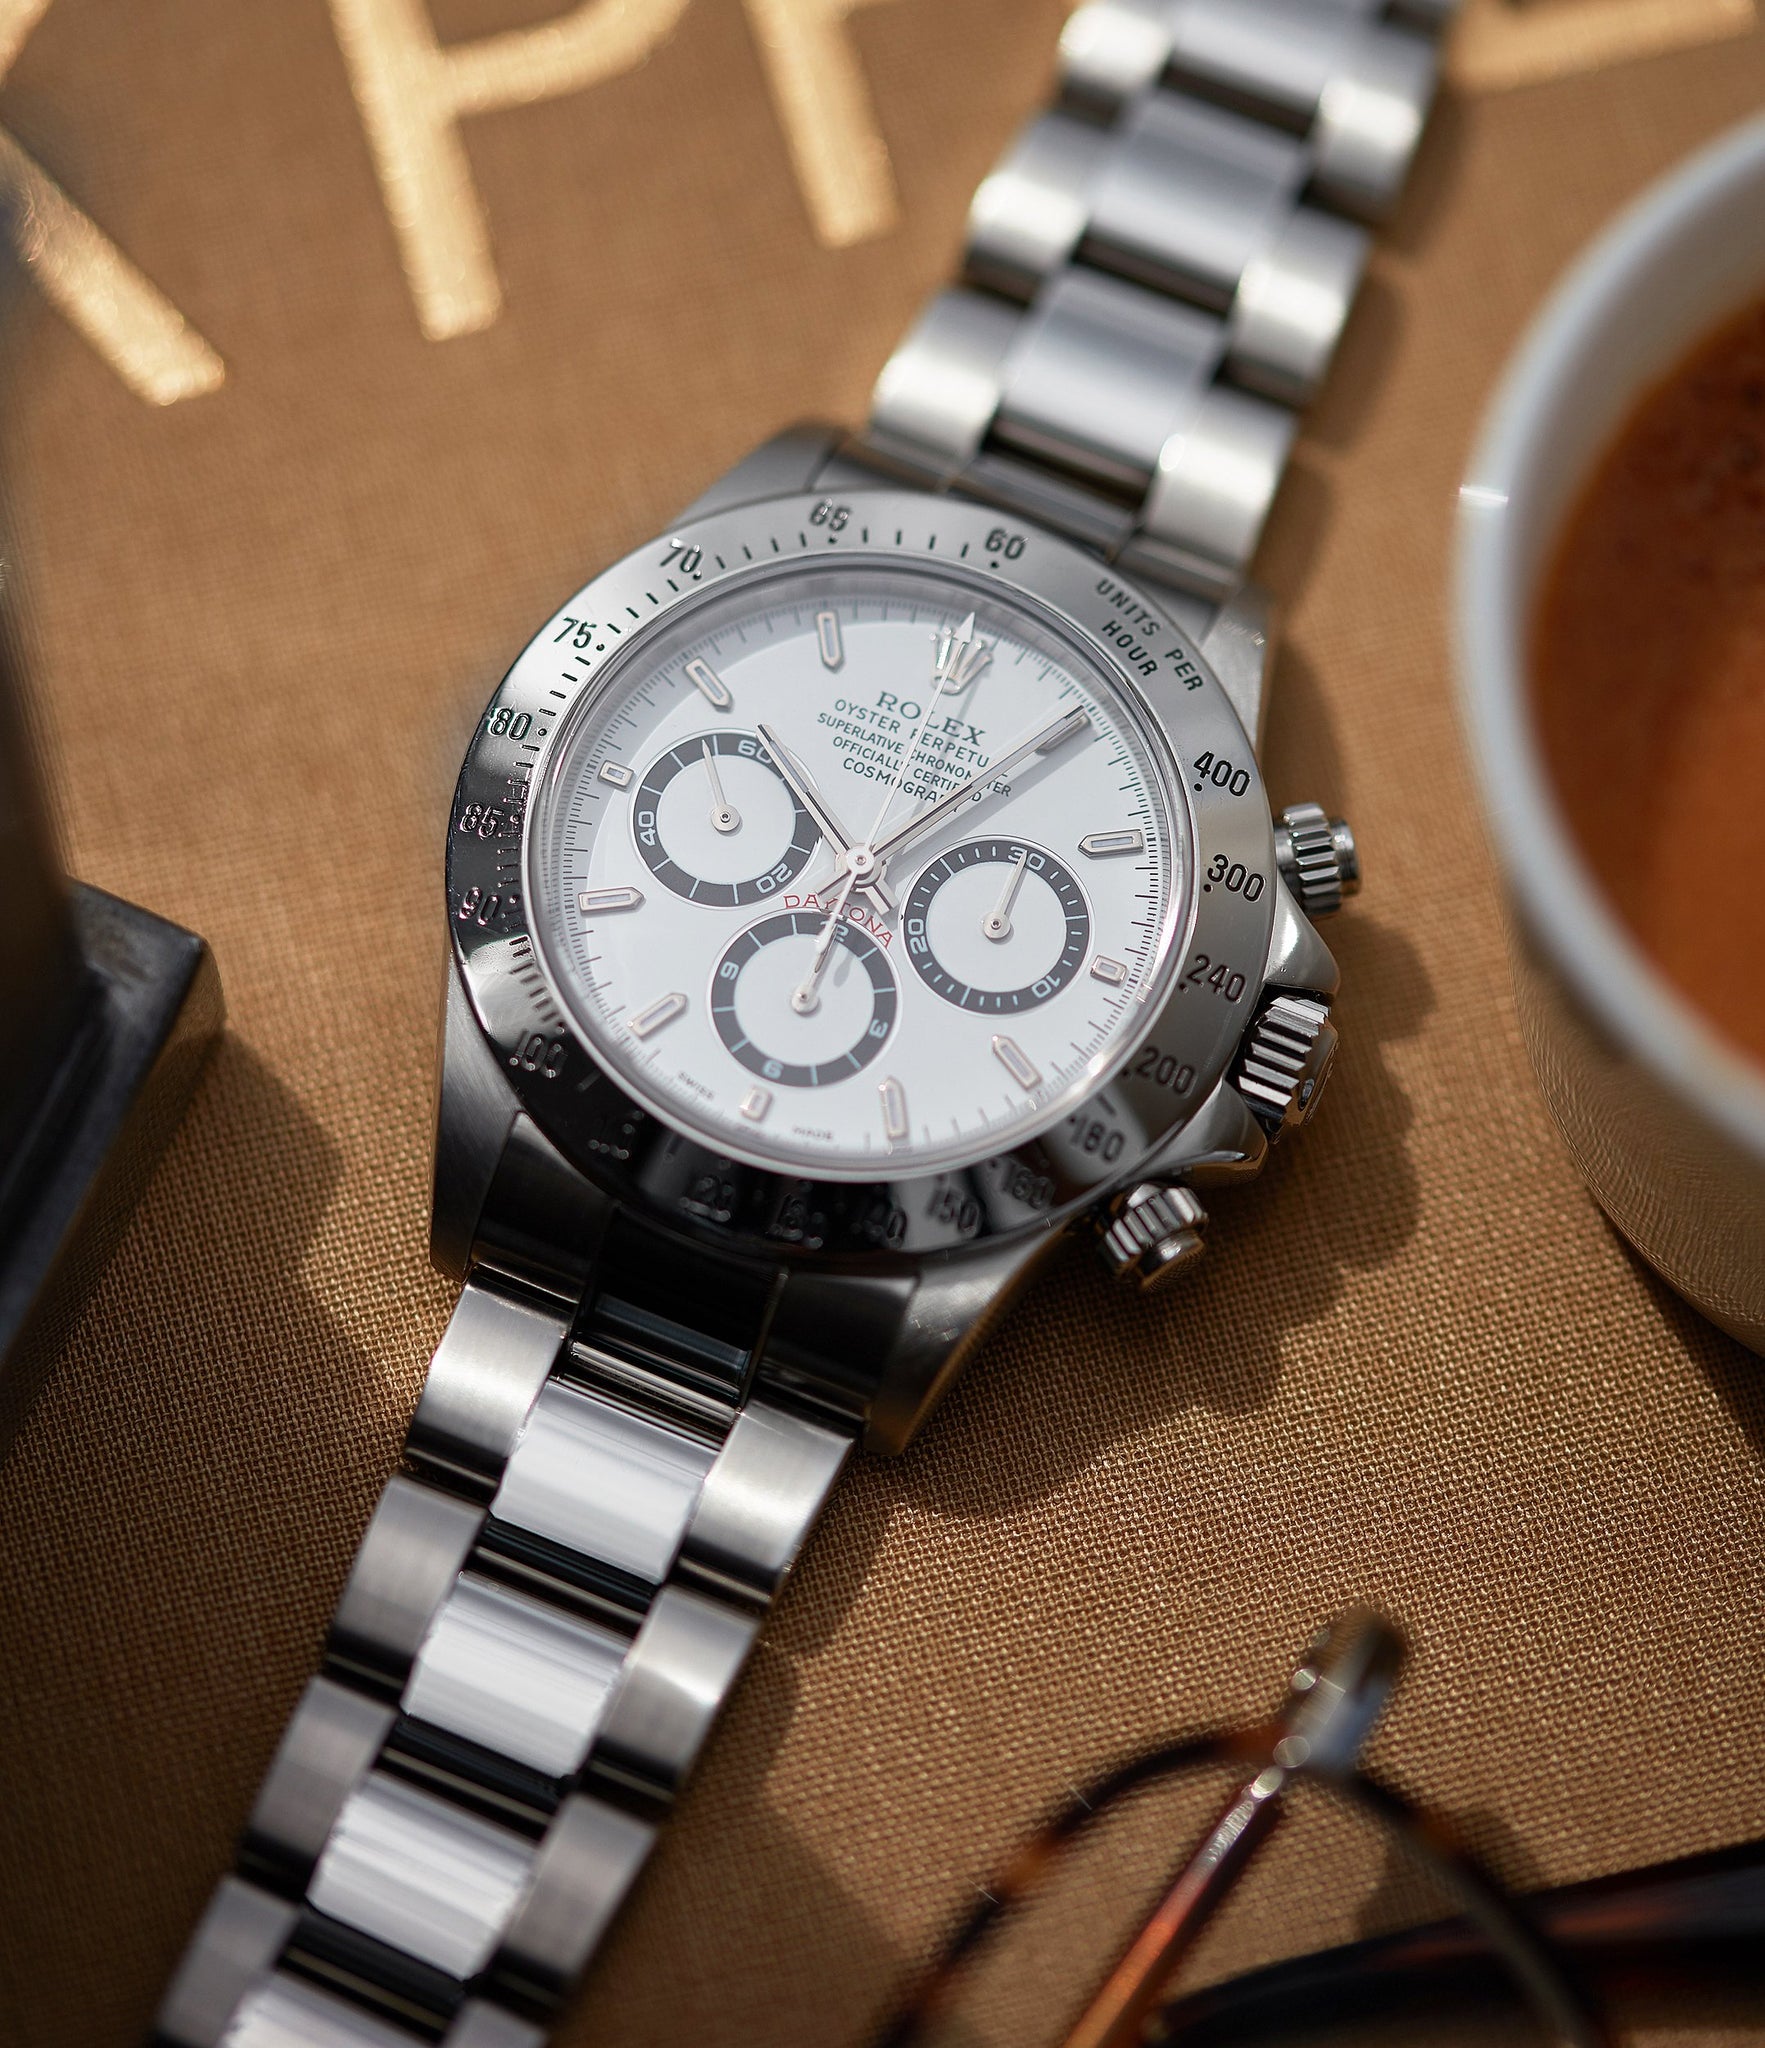 Rolex Daytona 16520 Cal. 4030 automatic Zenith steel vintage chronograph sports watch full set for sale online A Collected Man London specialist rare watches